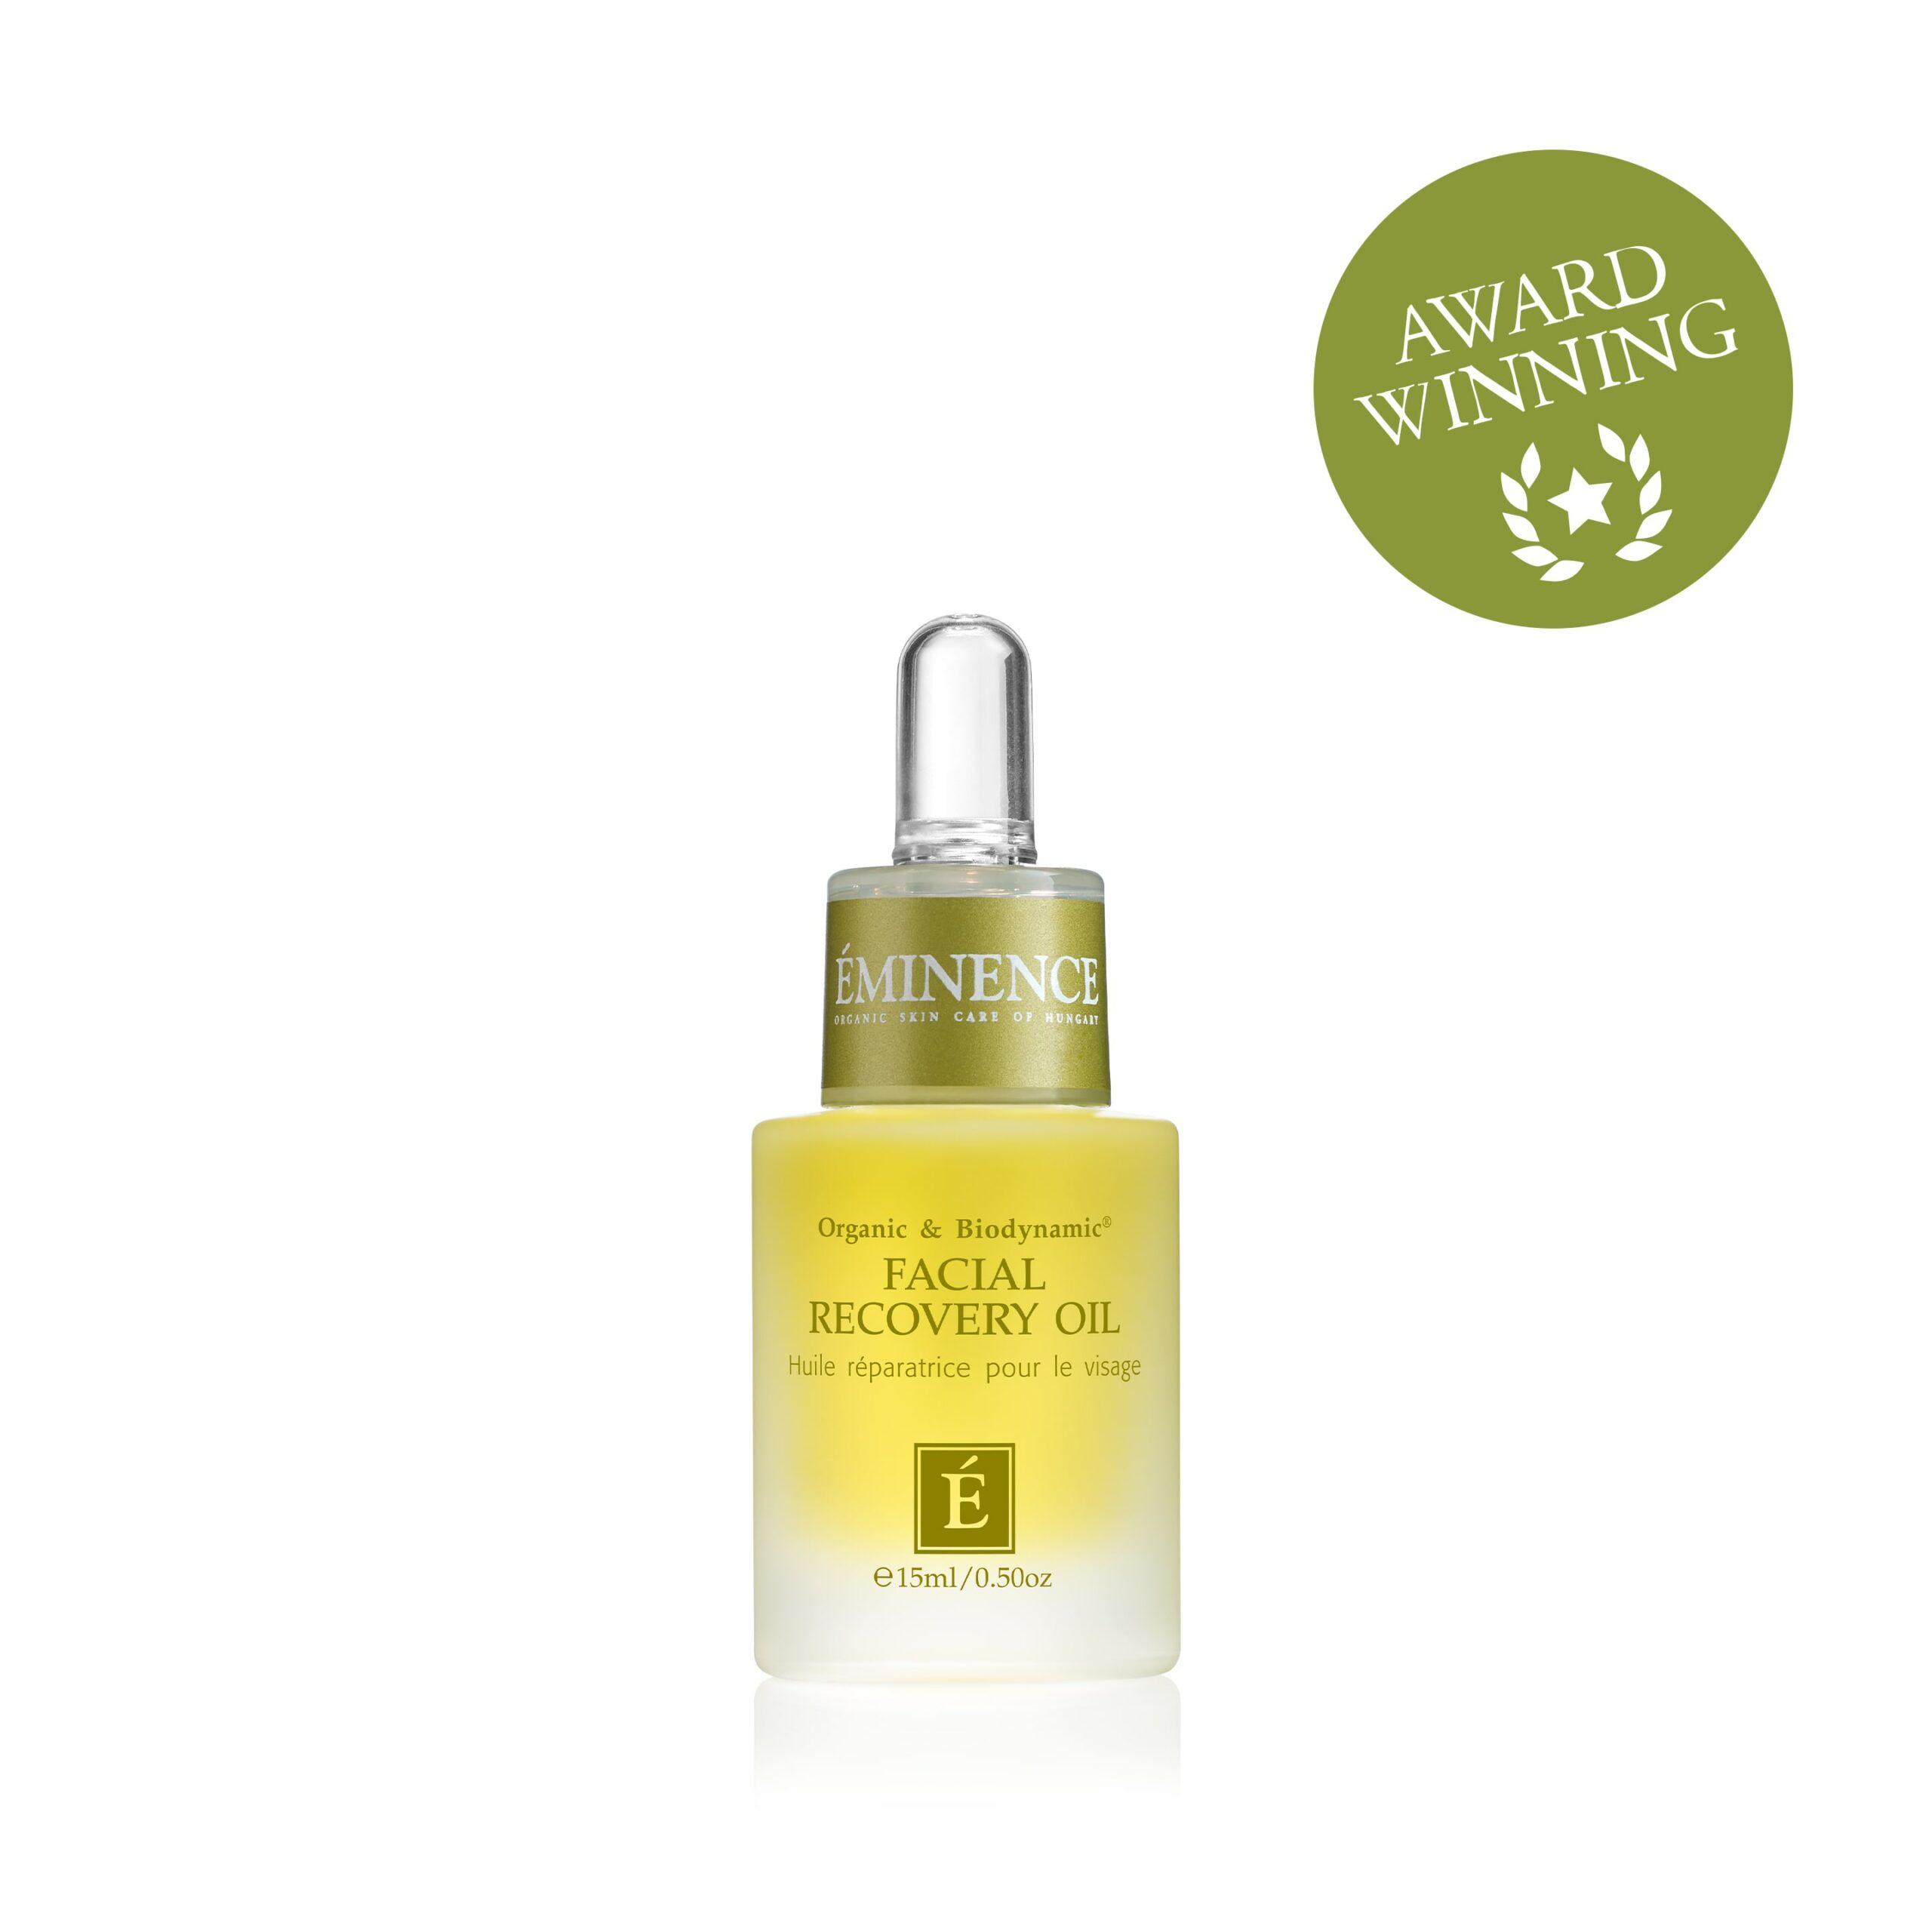 Eminence-Organics-Facial-Recovery-Oil-SQ-AW